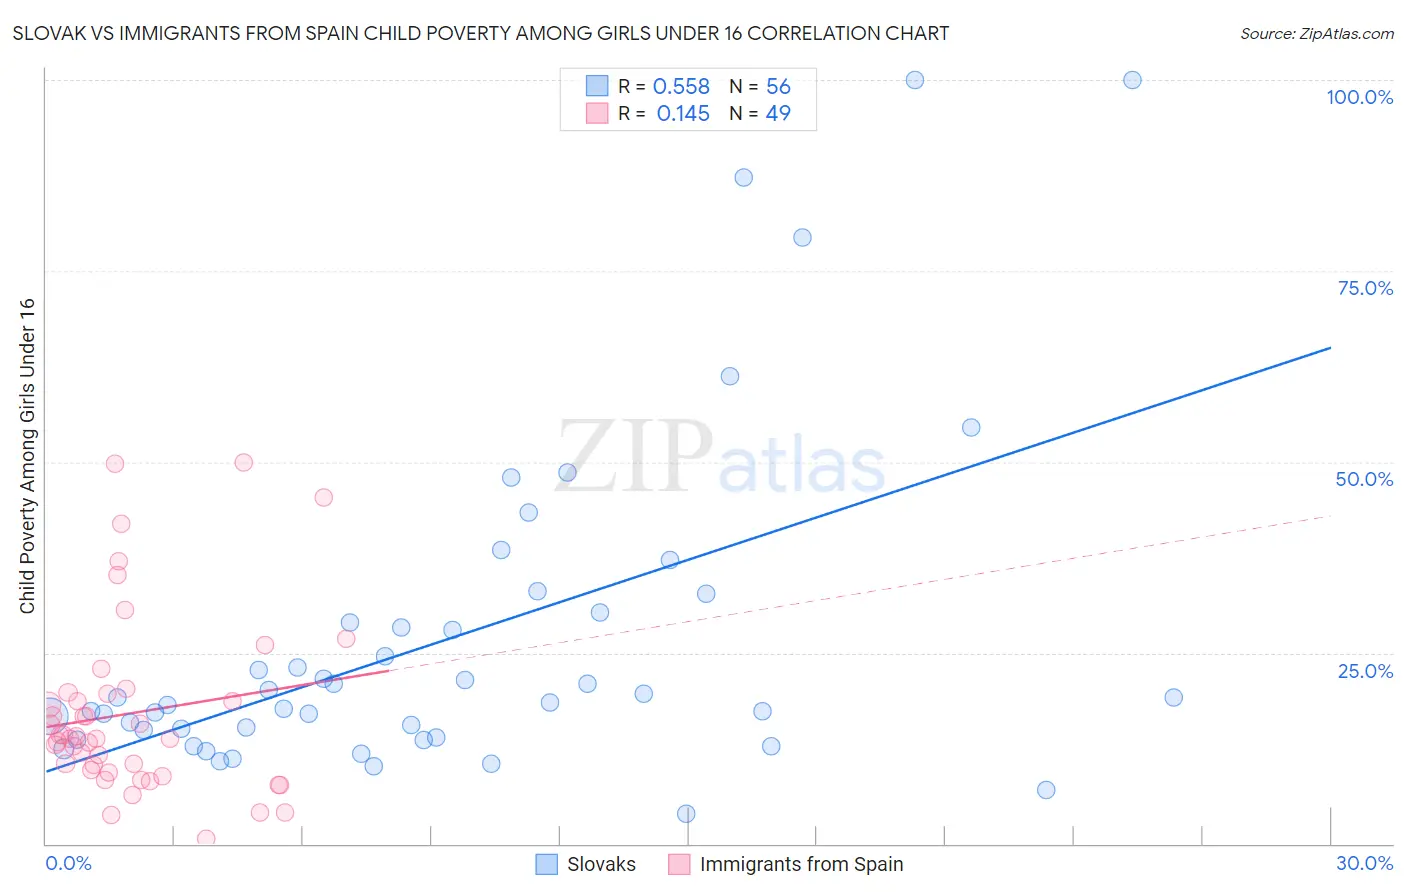 Slovak vs Immigrants from Spain Child Poverty Among Girls Under 16